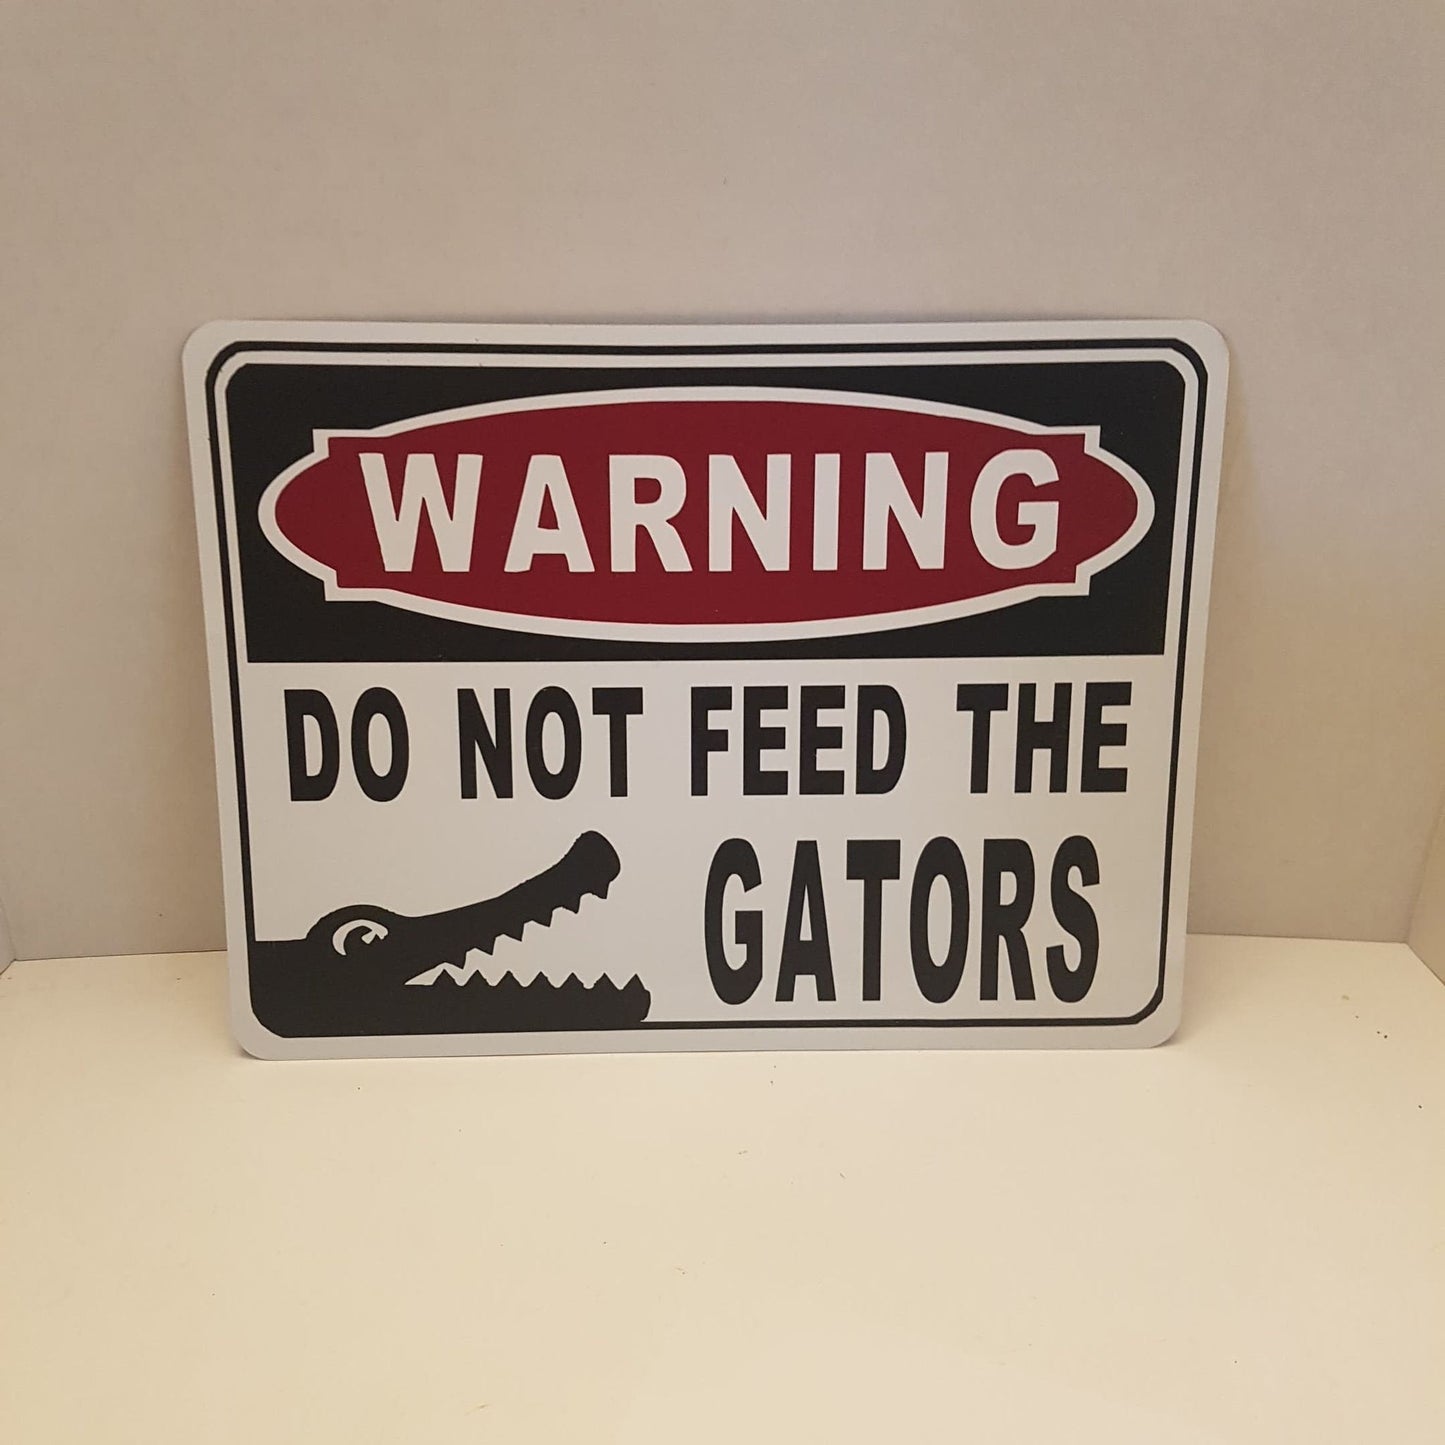 warning do not feed the gators - pond or swimming pool sign